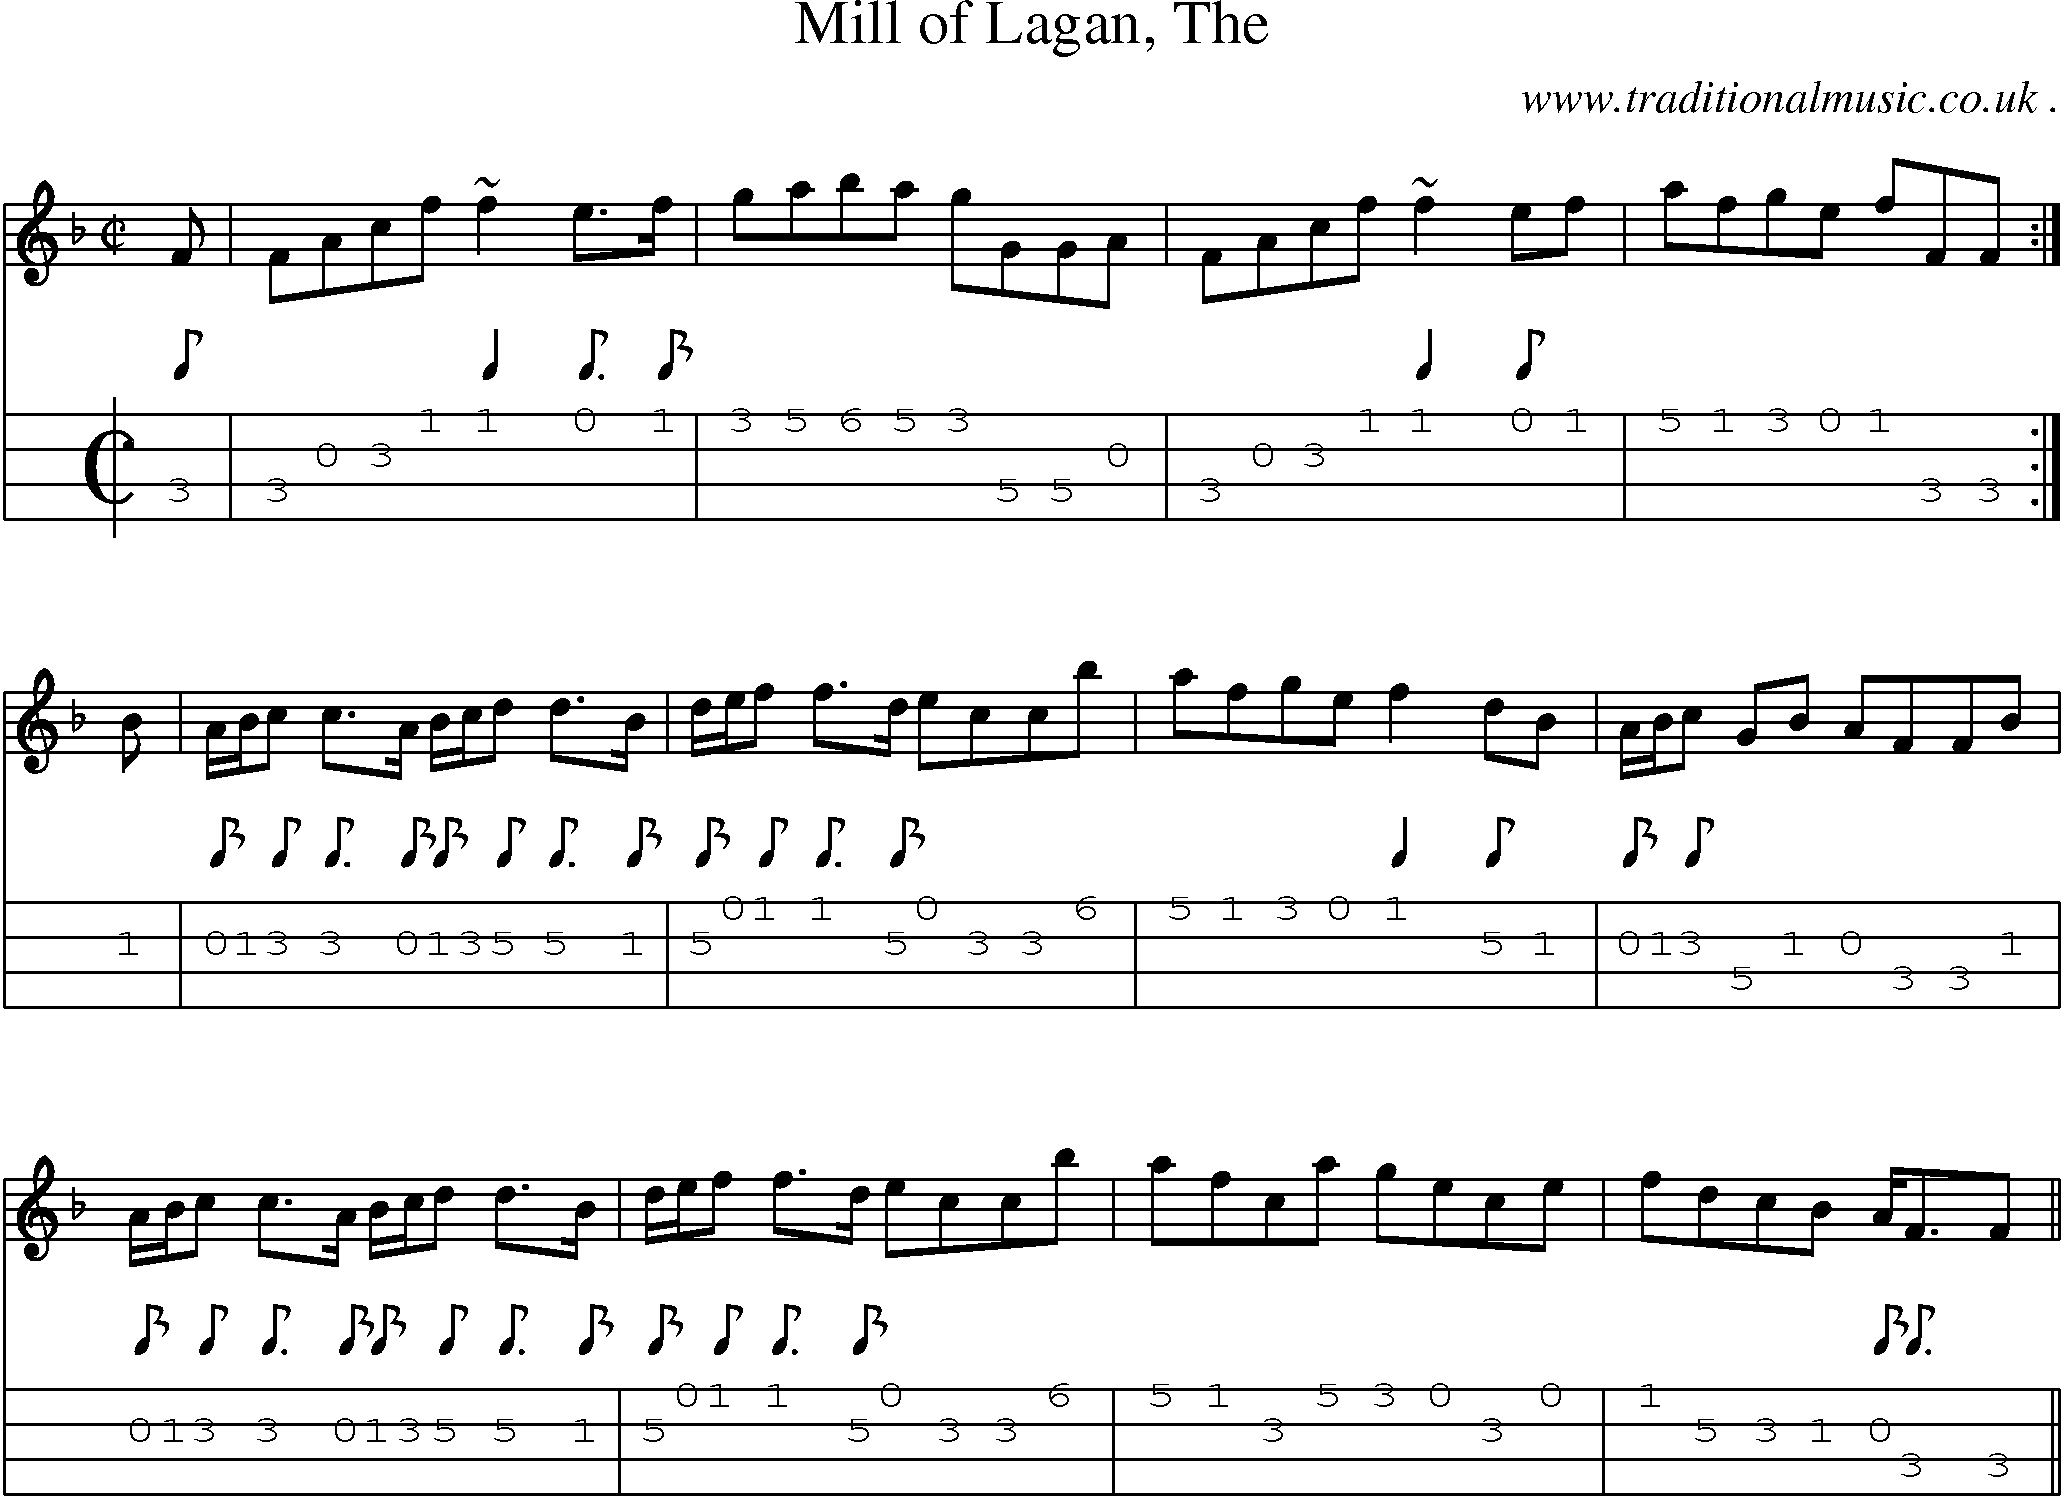 Sheet-music  score, Chords and Mandolin Tabs for Mill Of Lagan The